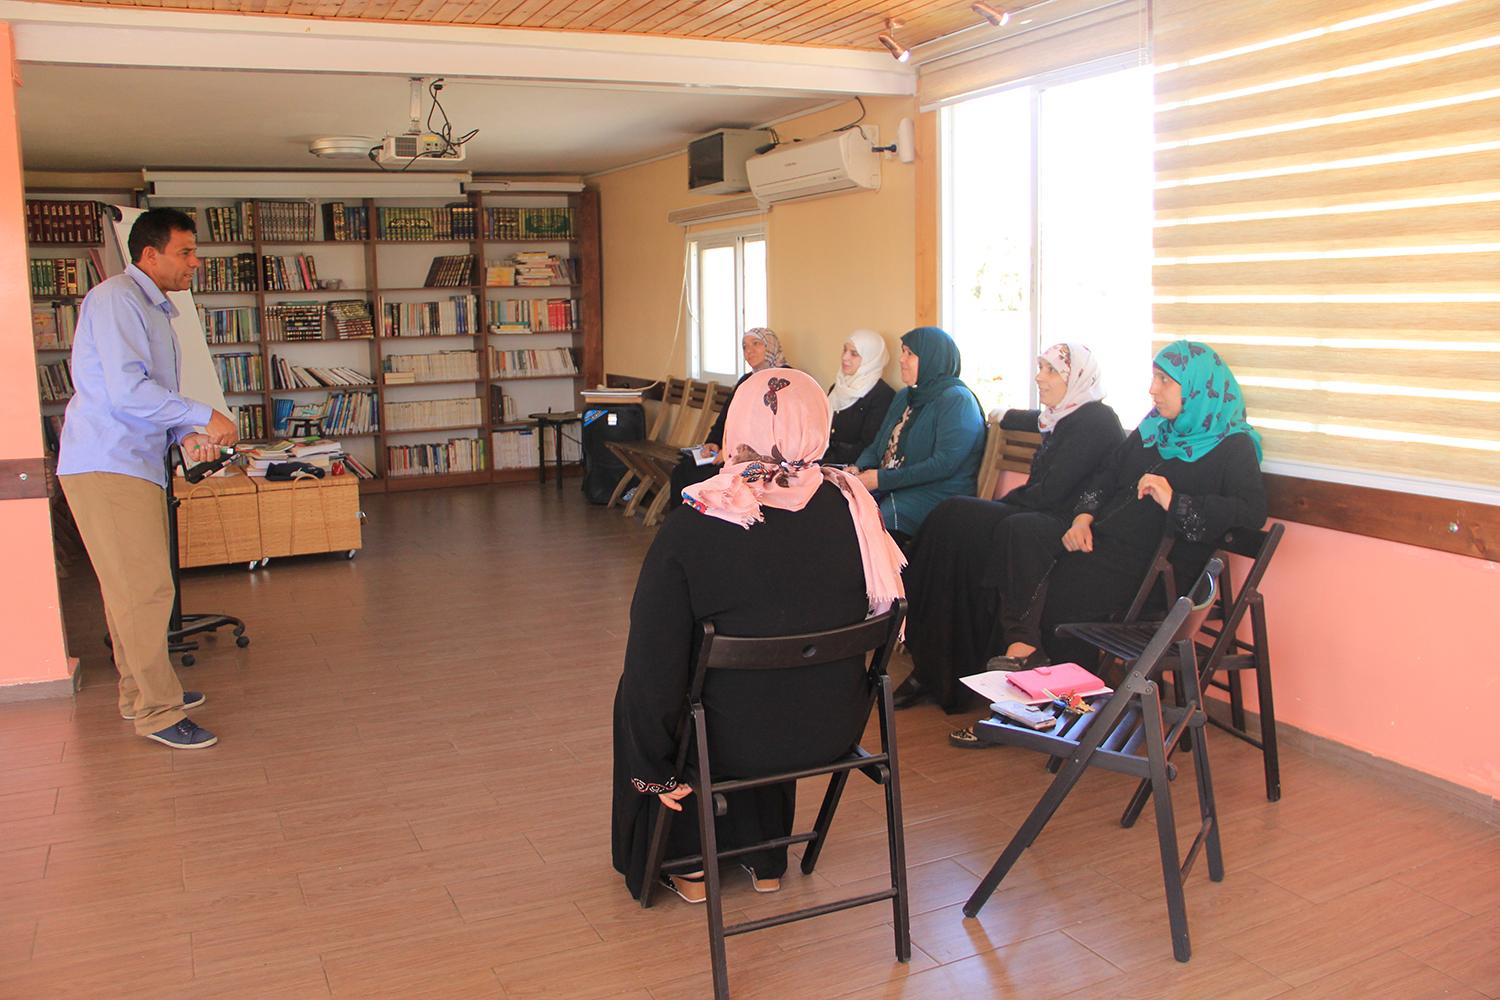 “We Aware Our Community” Project for Bab Hutta Women